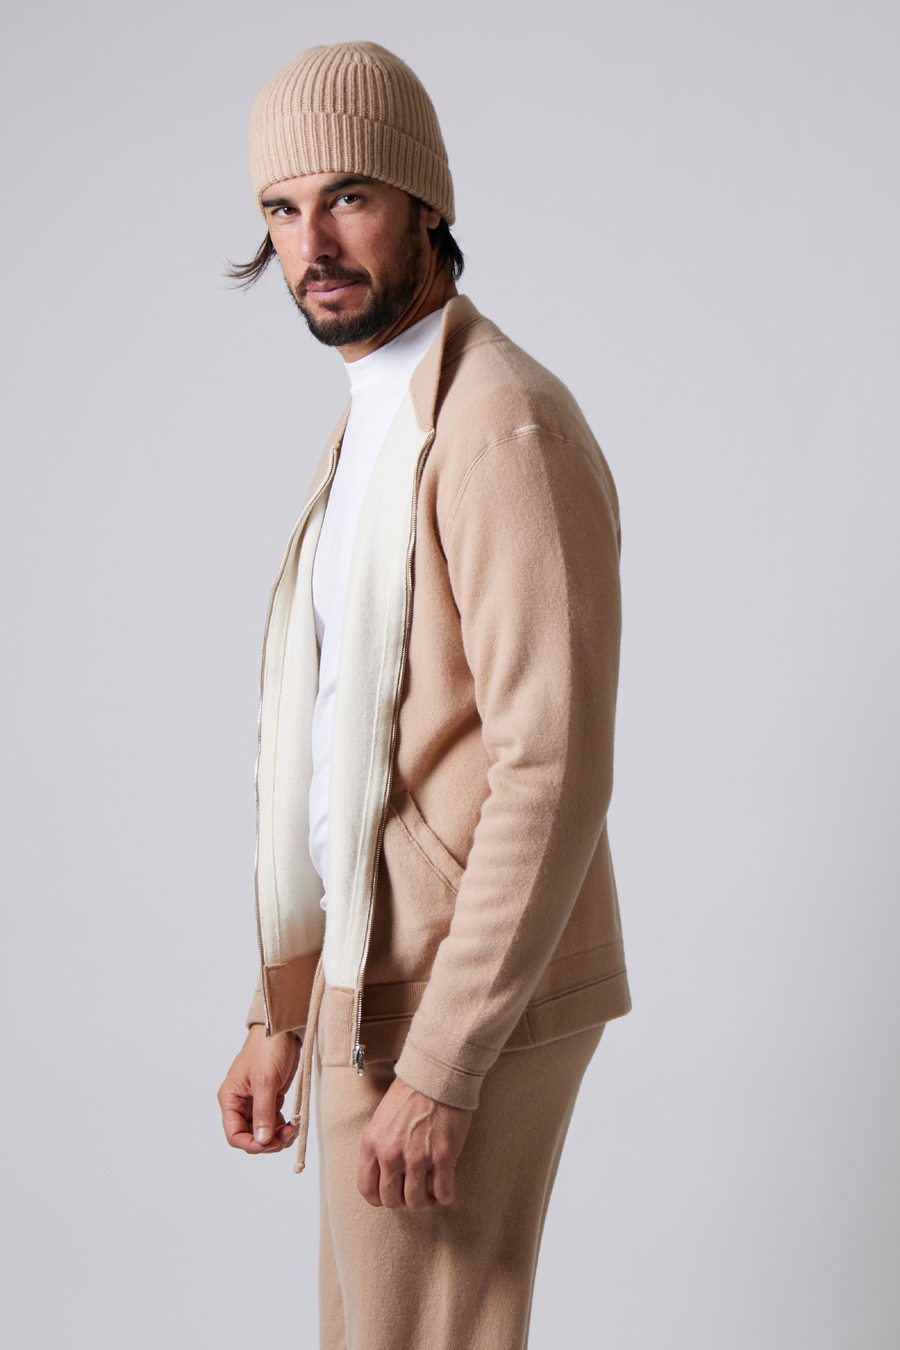 Buy the Daniele Fiesoli Zip-Up Wool Bomber Beige at Intro. Spend £50 for free UK delivery. Official stockists. We ship worldwide.